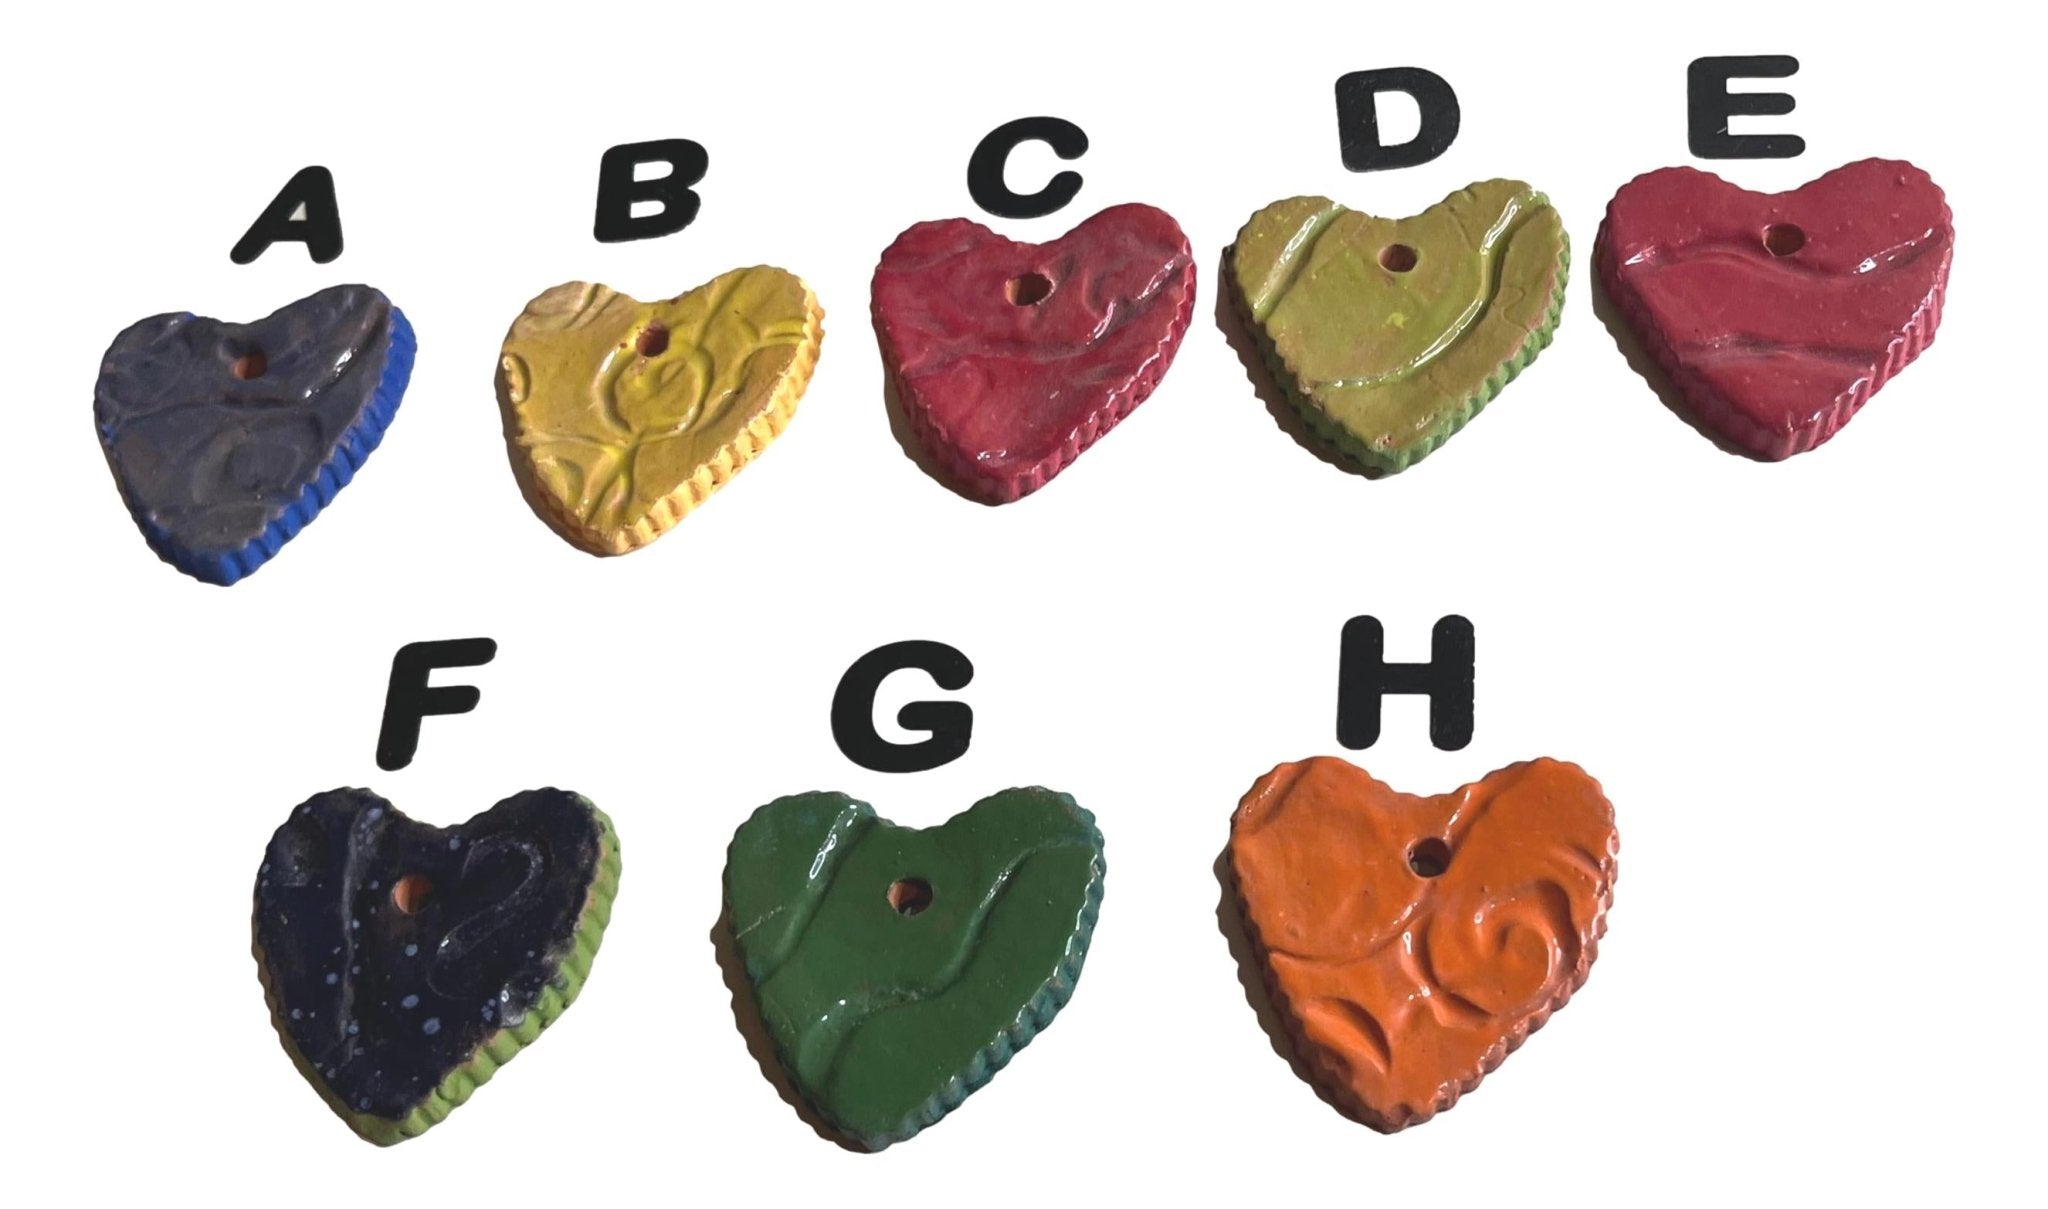 Heart Clay Handcrafted W:2 inches X L: 2 inches - Ysleta Mission Gift Shop- VOTED 2022 El Paso's Best Gift Shop